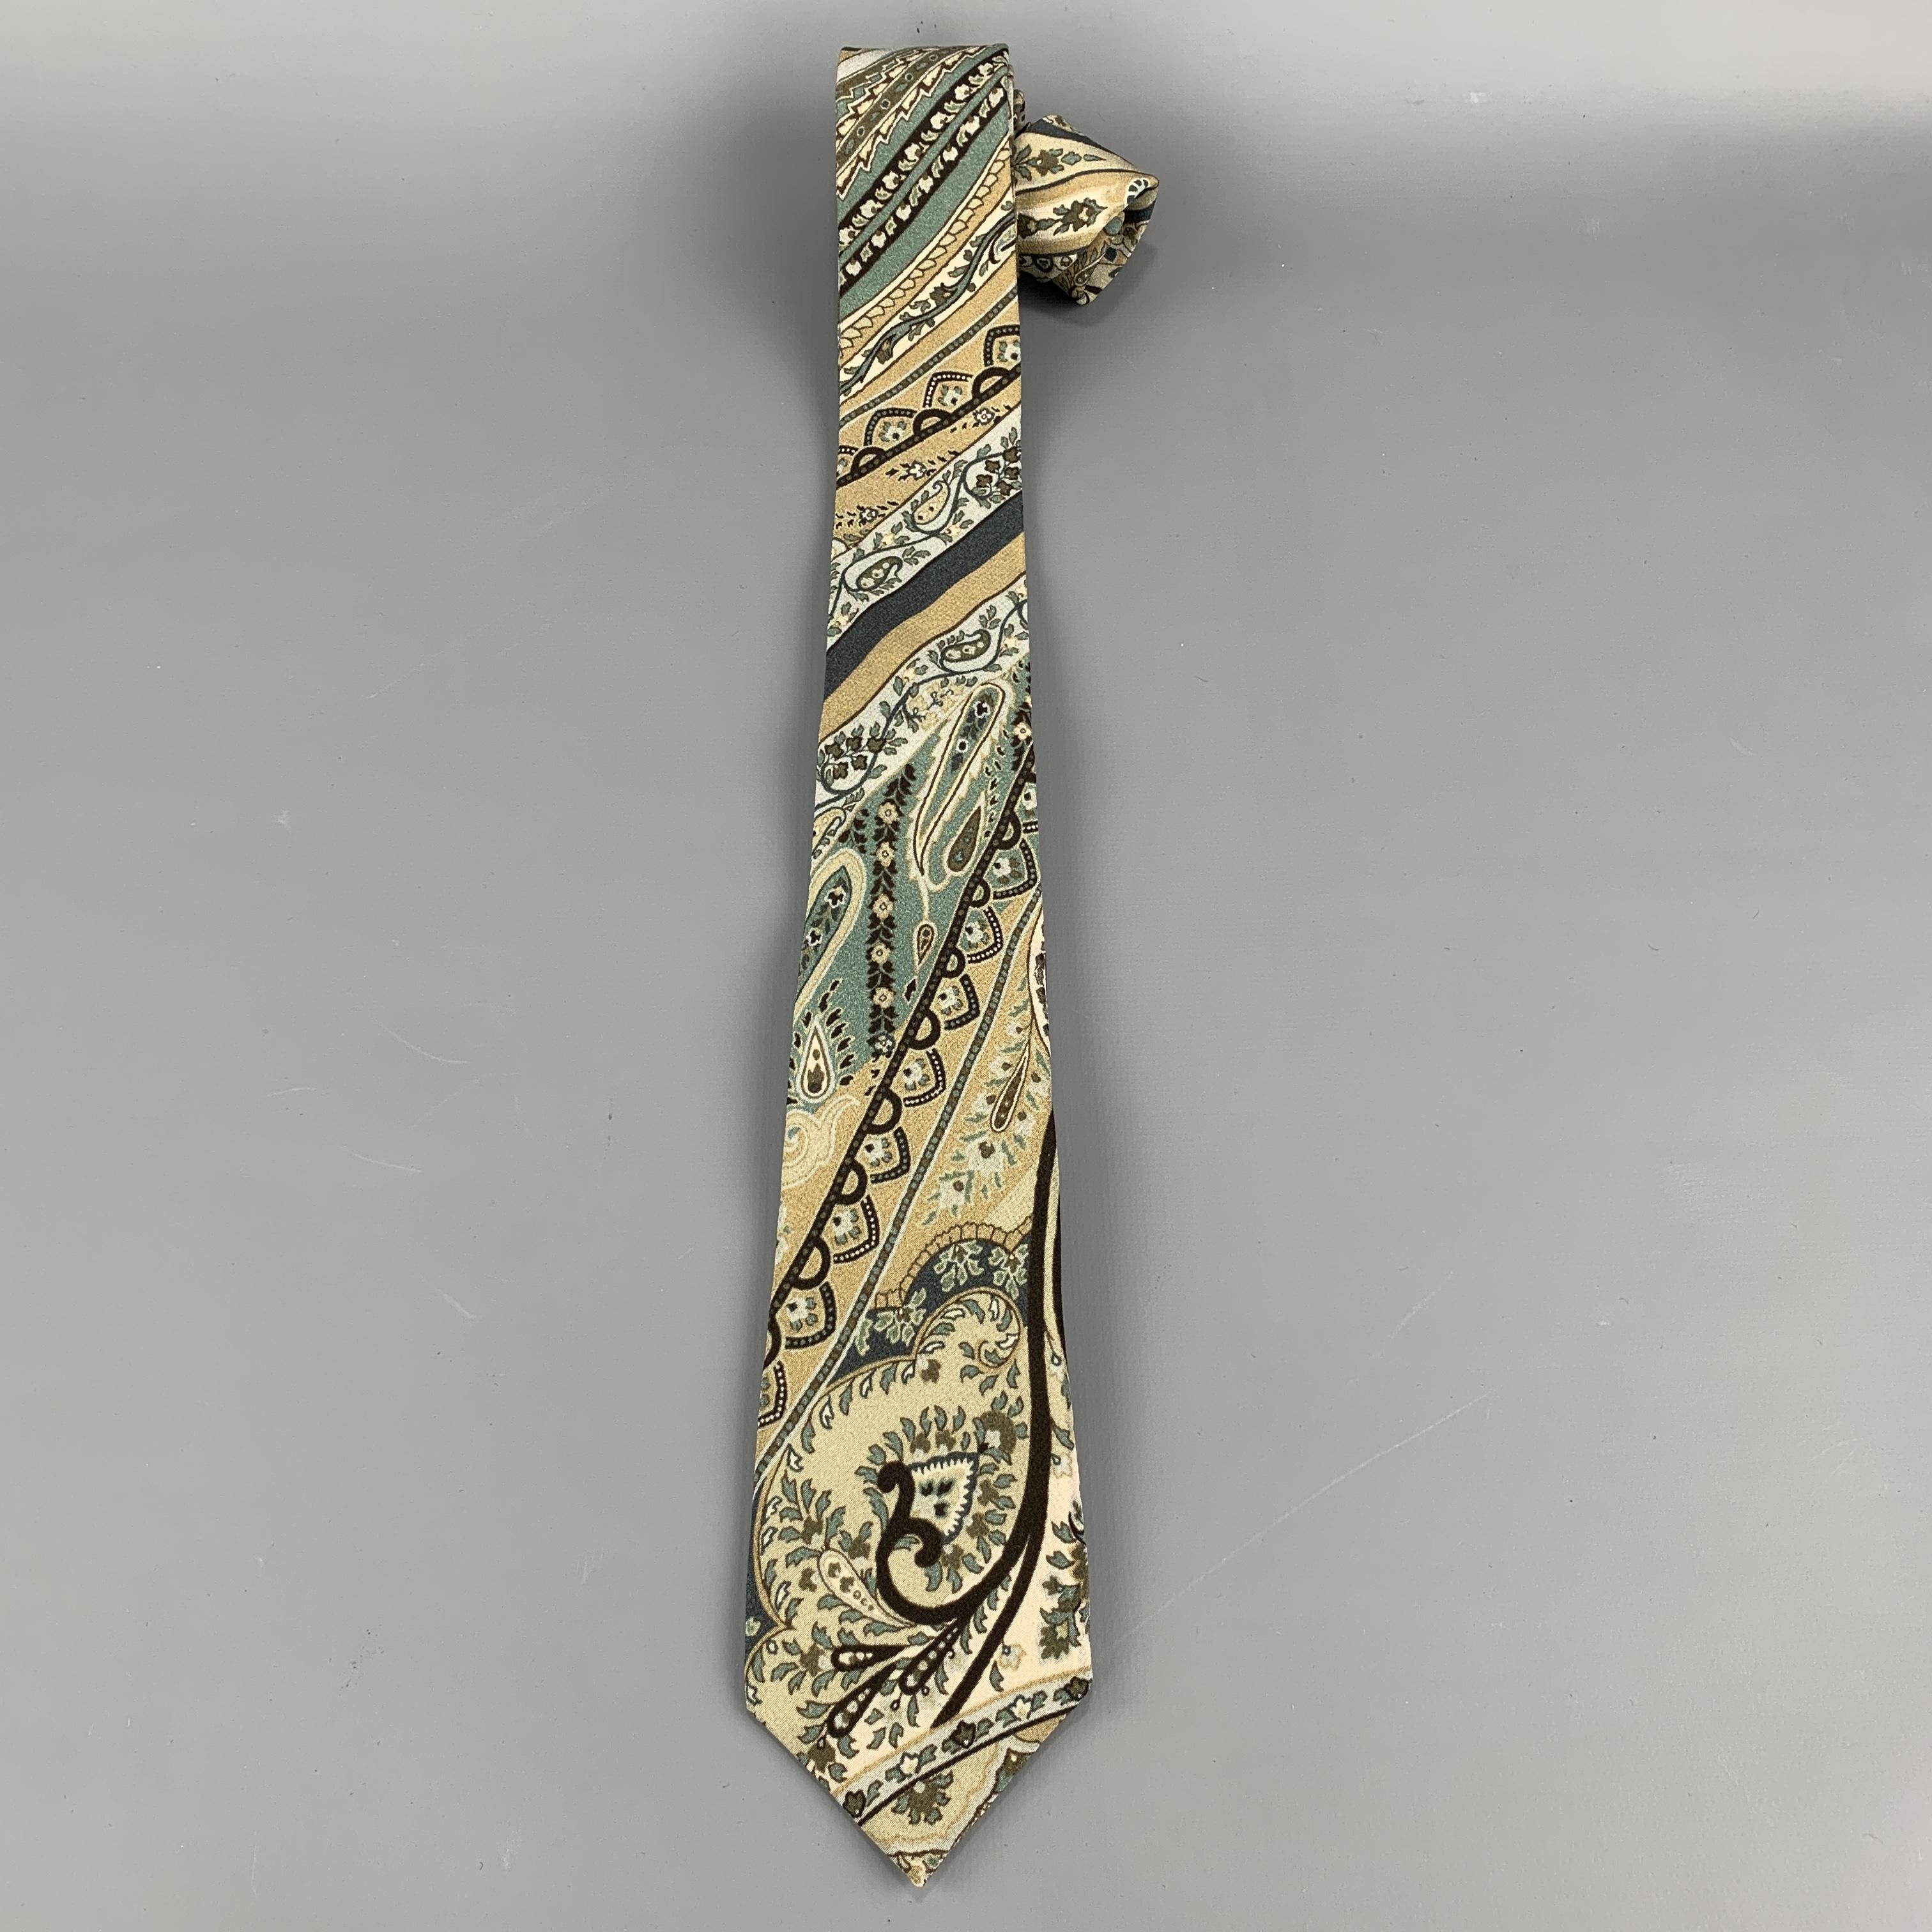 ETRO skinny necktie comes in beige silk with all over teal paisley print. Made in Italy.

Excellent Pre-Owned Condition.

Width: 2.45 in.